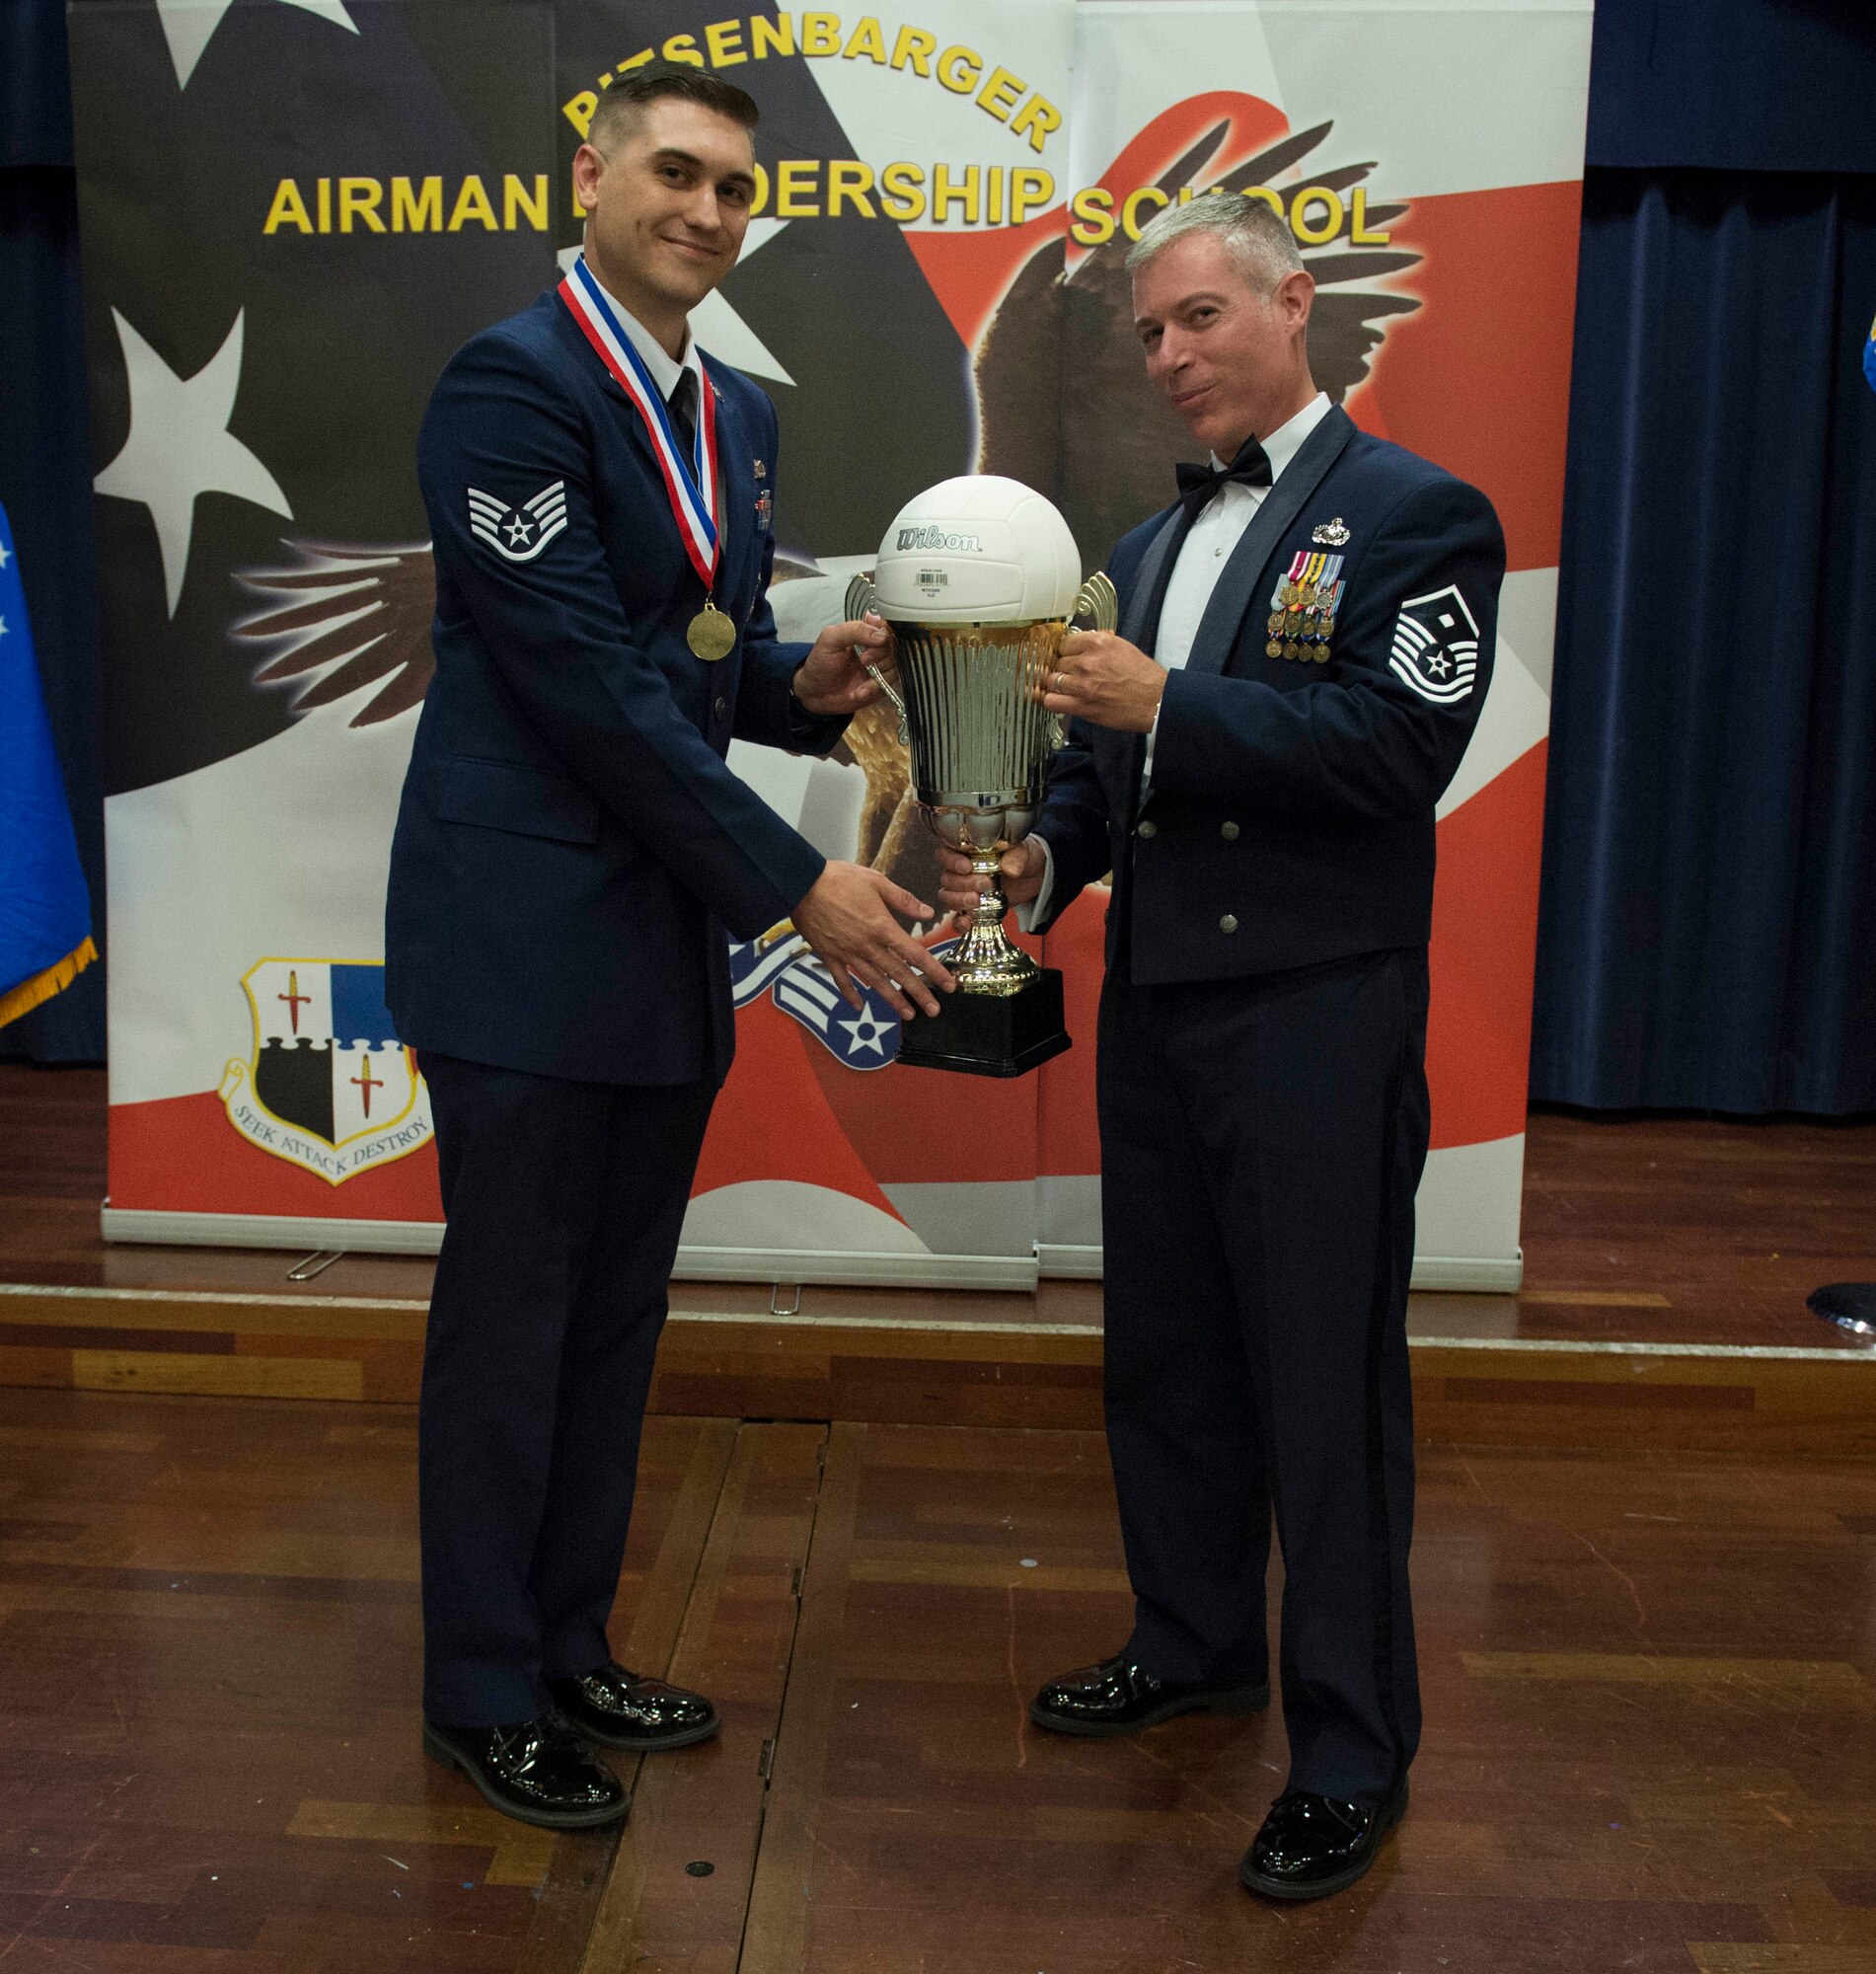 U.S Air Force Master Sgt. Bryon Hambacker, 726th Air Mobility Squadron first sergeant, right, hands a trophy to Staff Sgt. Cameron Gunnels, 52 Security Forces Squadron base defense operations center controller, left, during a Pitsenbarger Airman Leadership School graduation at Club Eifel on Spangdahlem Air Base, Germany, Aug. 25, 2016. The trophy exchange occurs when an ALS class defeats senior NCOs in a rivalry volleyball game held during the last two weeks of an ALS course. (U.S. Air Force photo by Airman 1st Class Preston Cherry/Released)